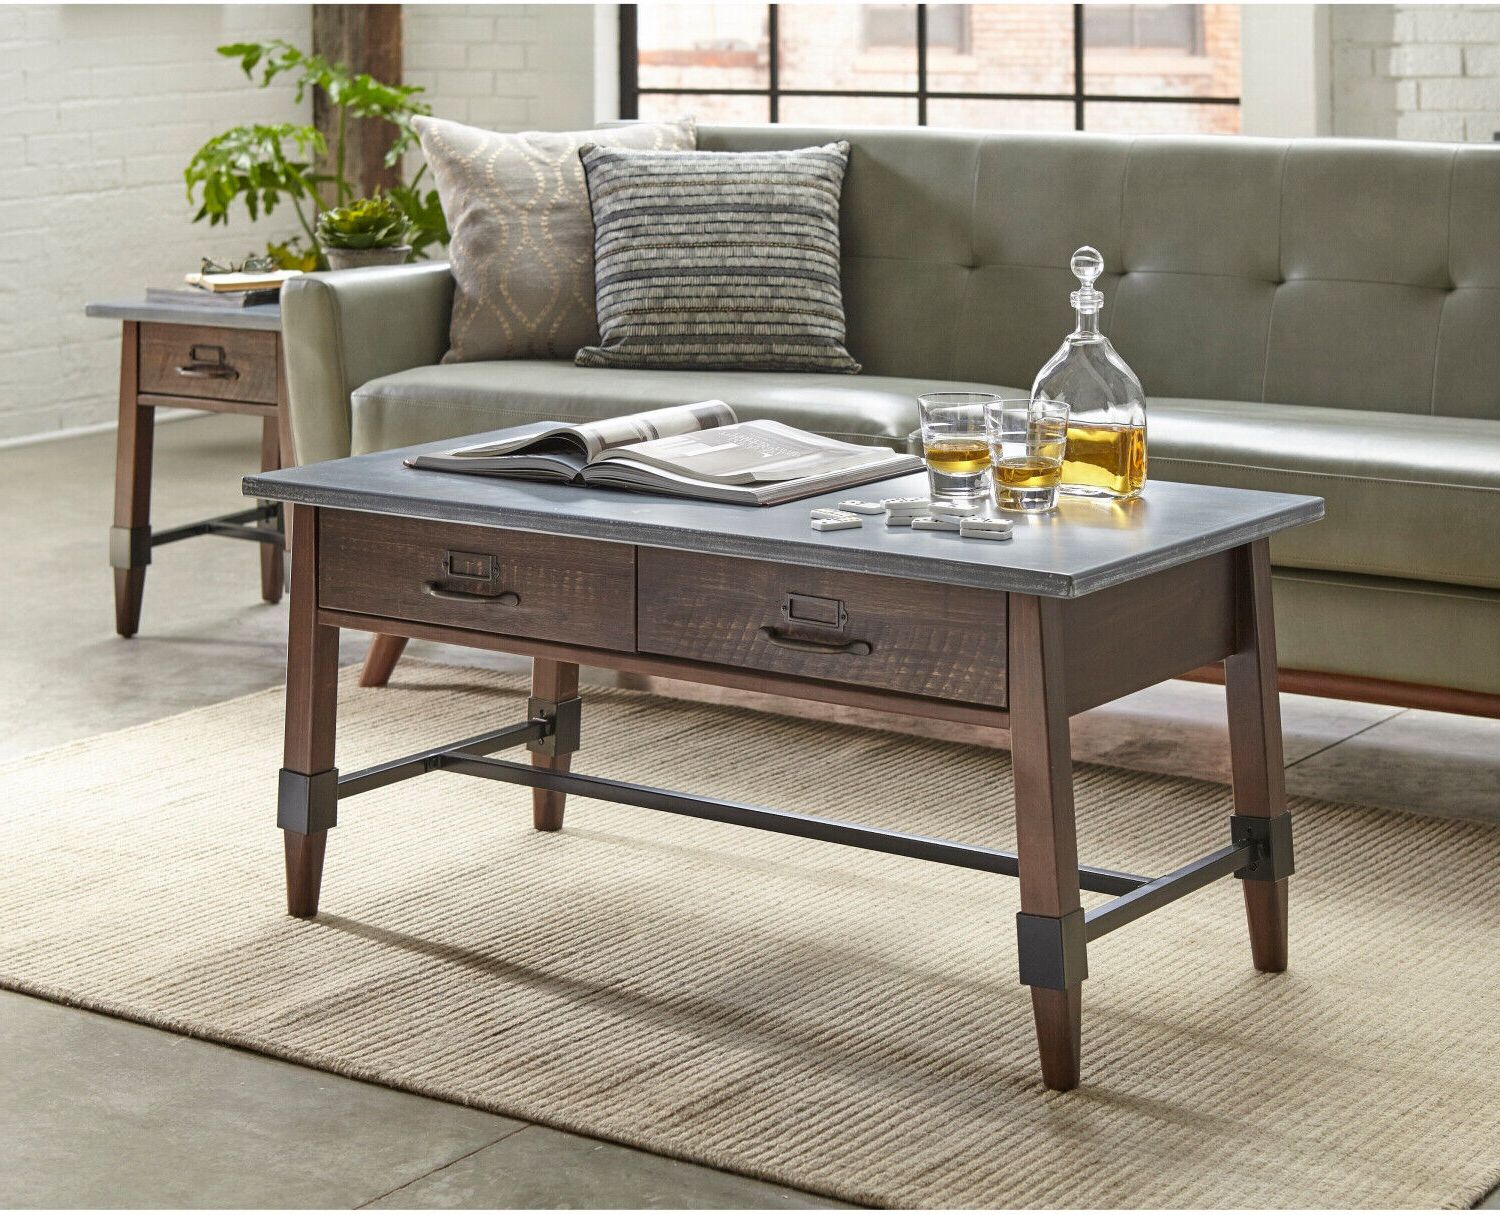 Ebay Pertaining To 2020 Industrial Faux Wood Coffee Tables (View 12 of 20)